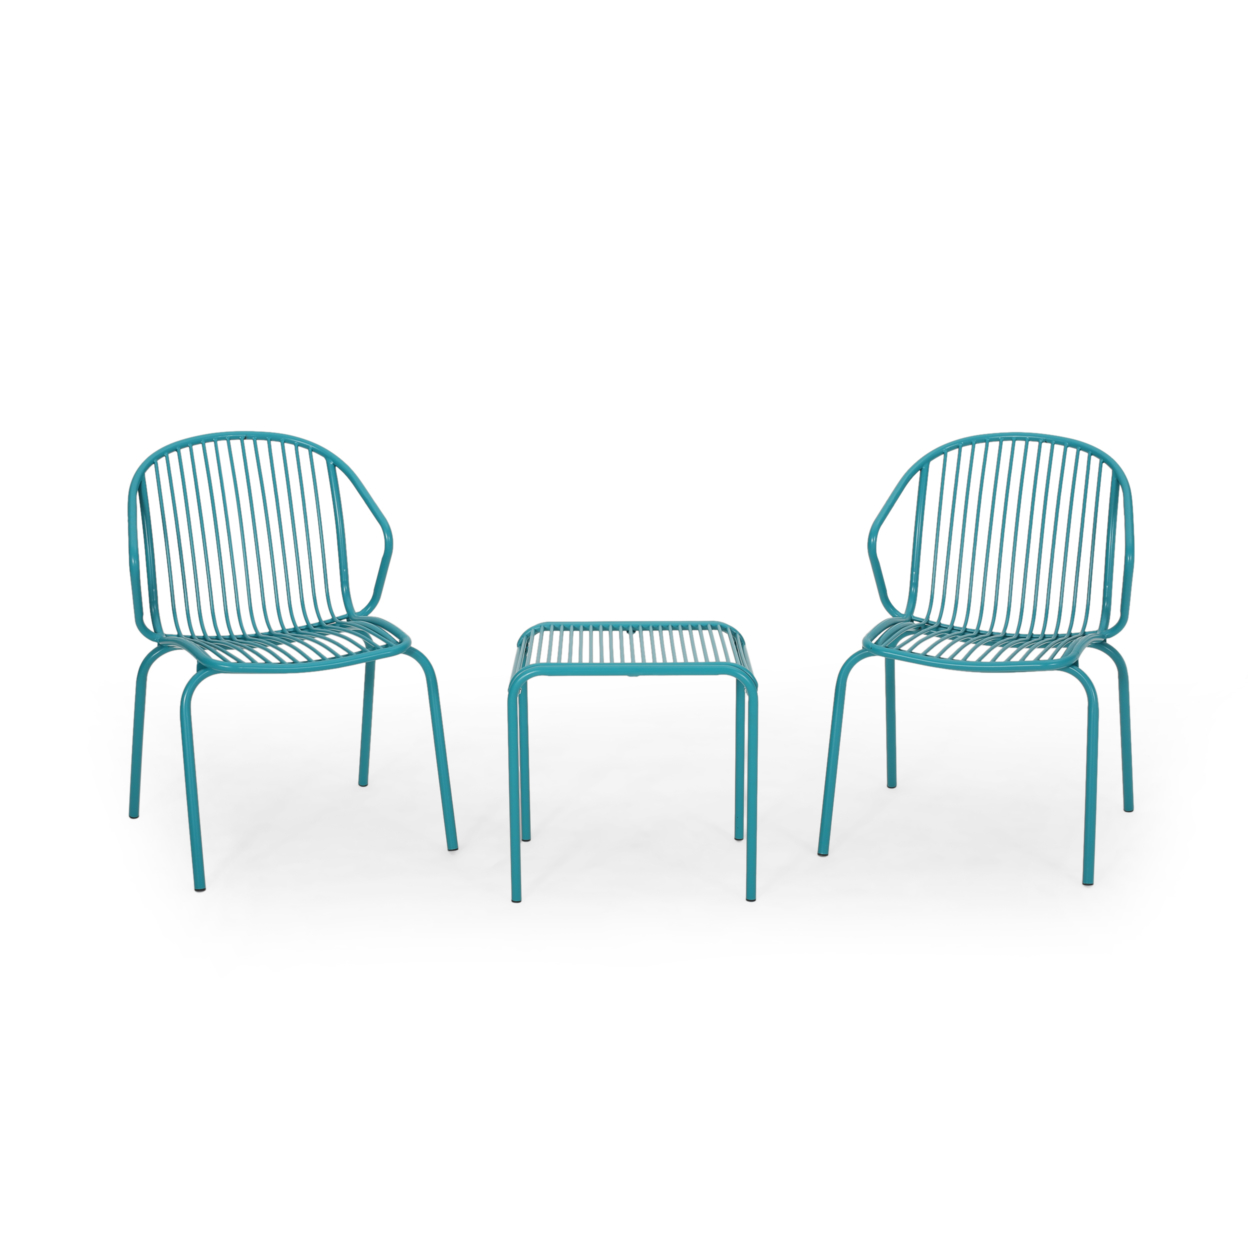 Hailey Outdoor Modern Iron 2 Seater Chat Set - Matte Teal